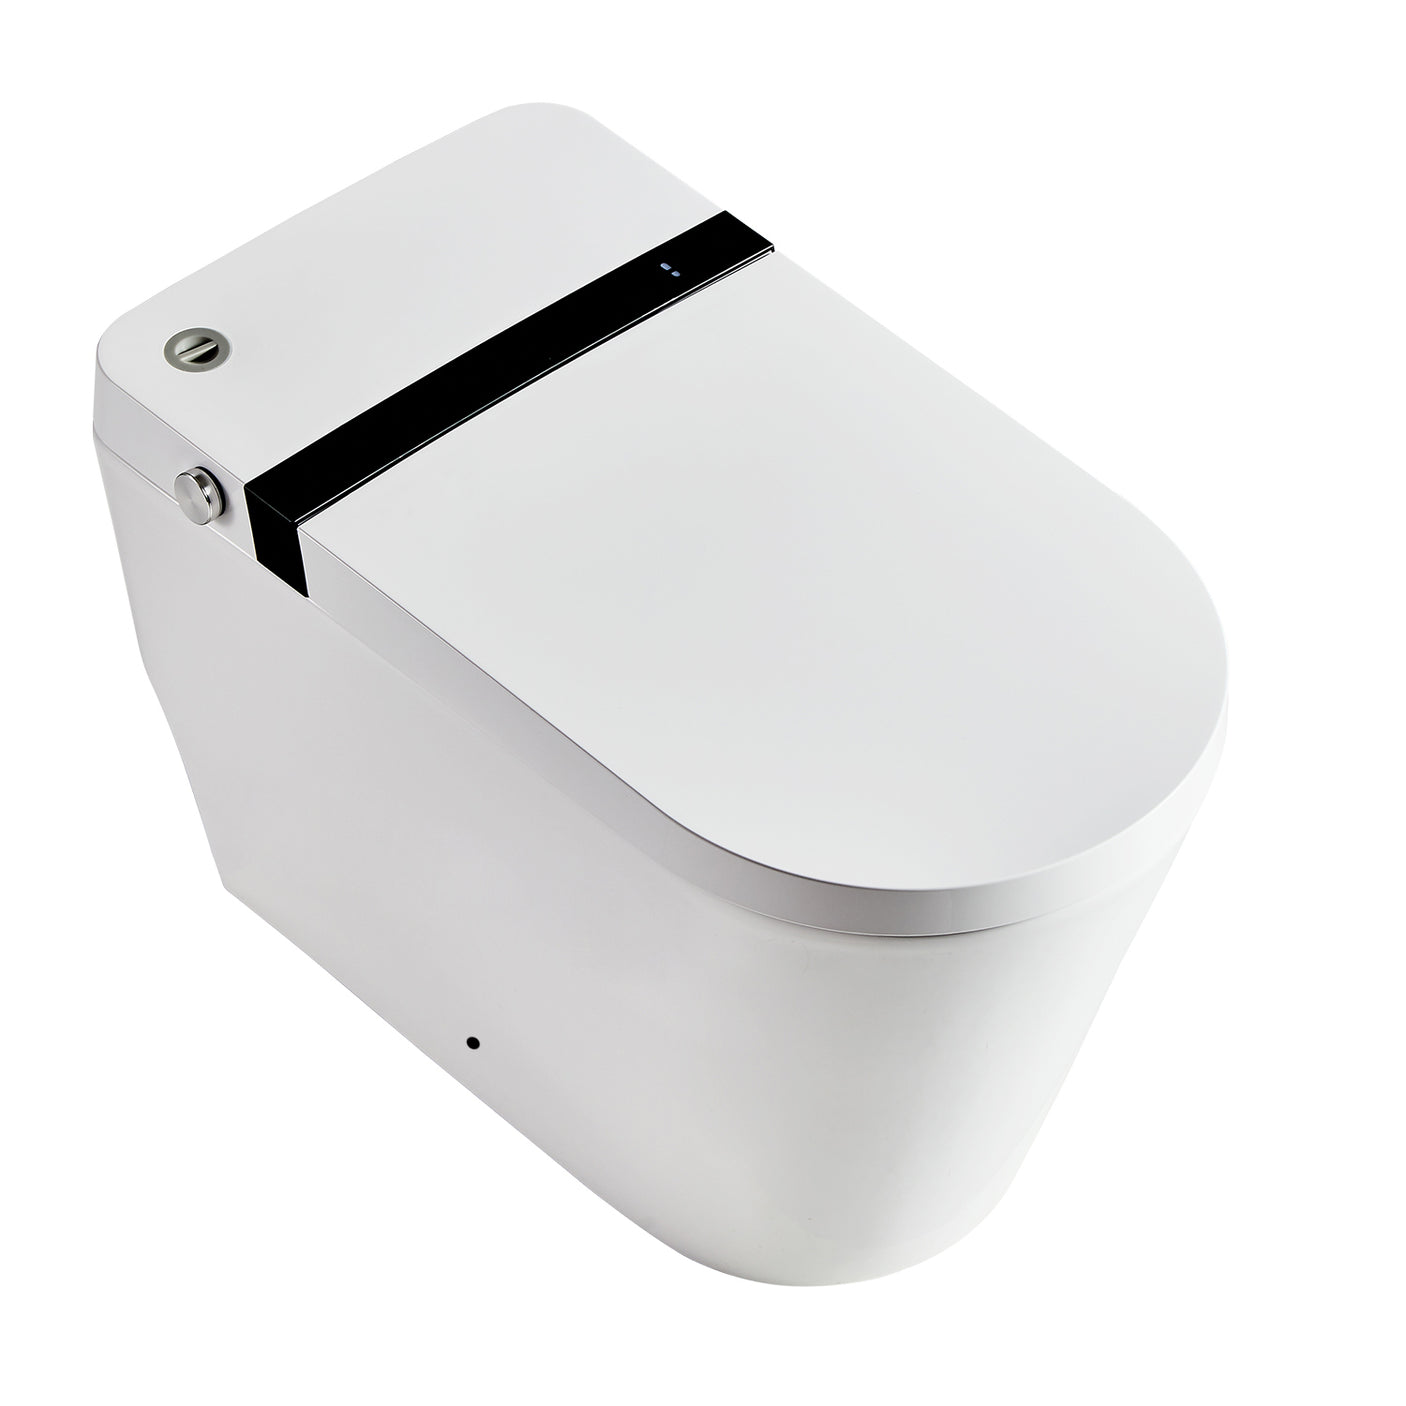 One Piece Smart Toilet with Auto-flush, Warm Water, Air Drying Function, Heated Seat, Remote Control